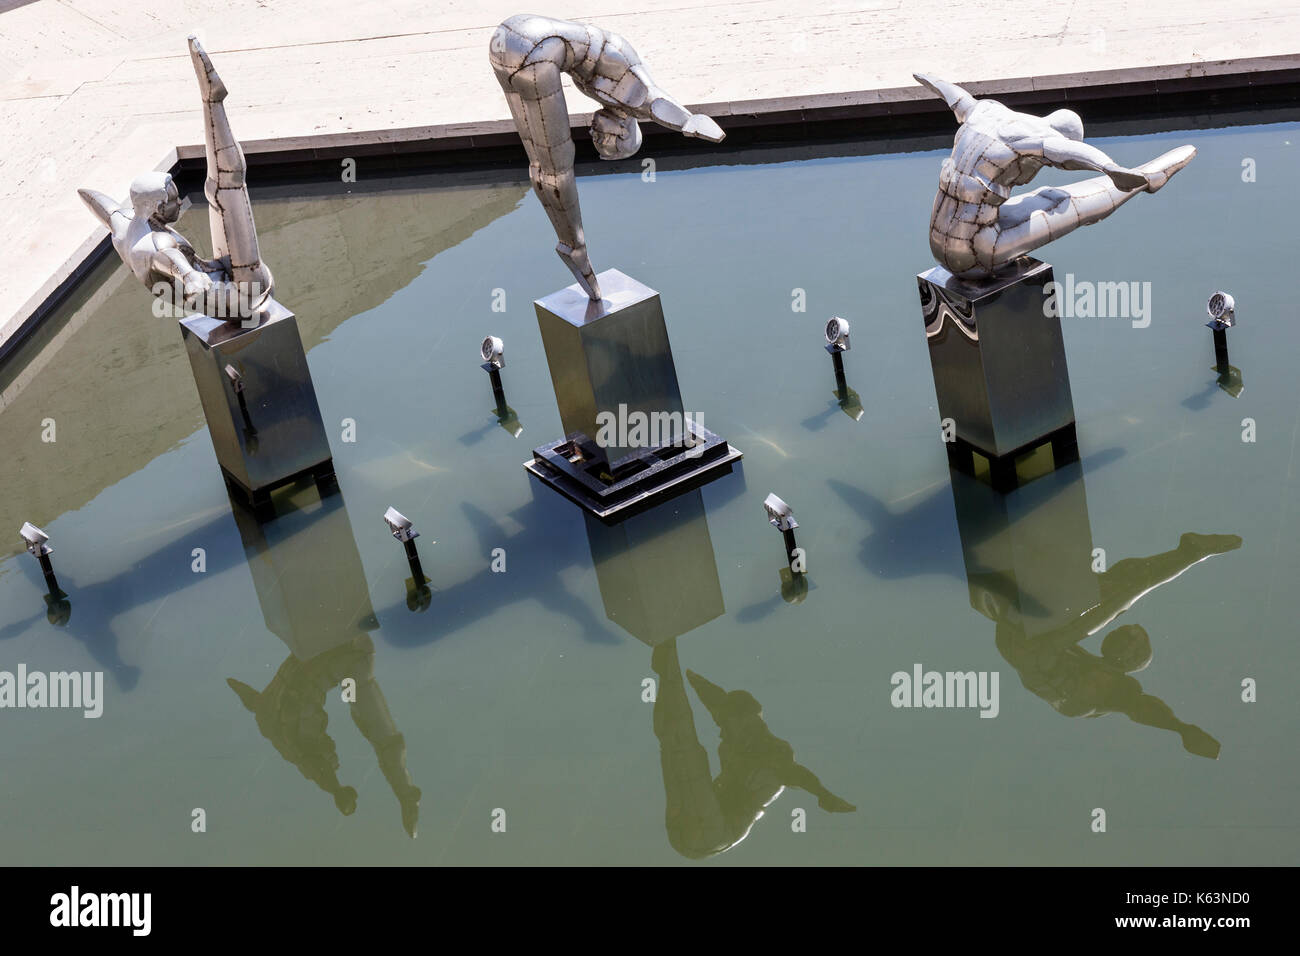 Sculpture called The Three Divers by David Martin, part of the Cascade Museum of Art in Yerevan Armenia,. Stock Photo